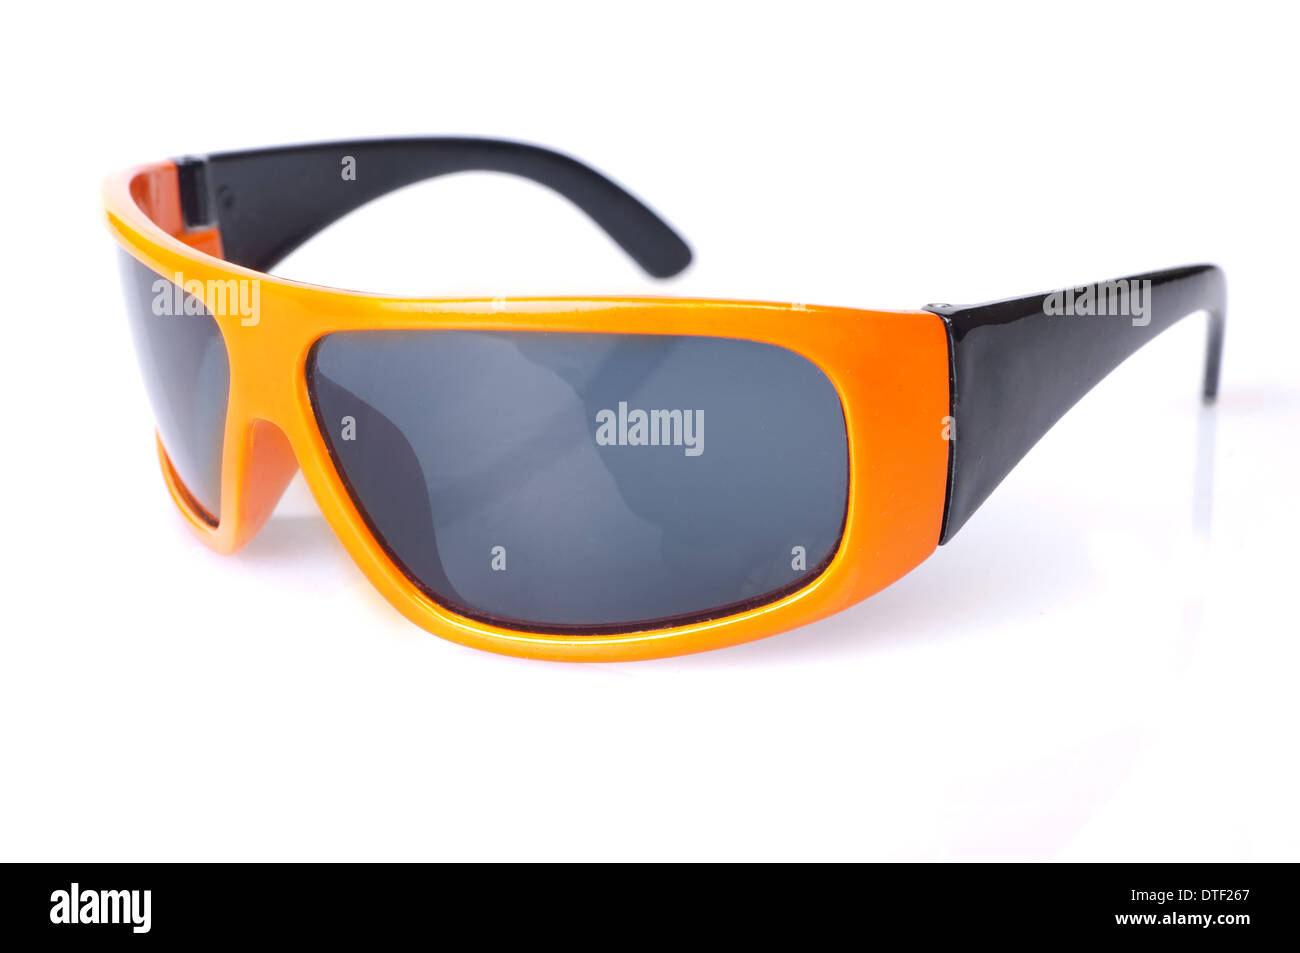 Kids lunettes orange isolated on white Banque D'Images